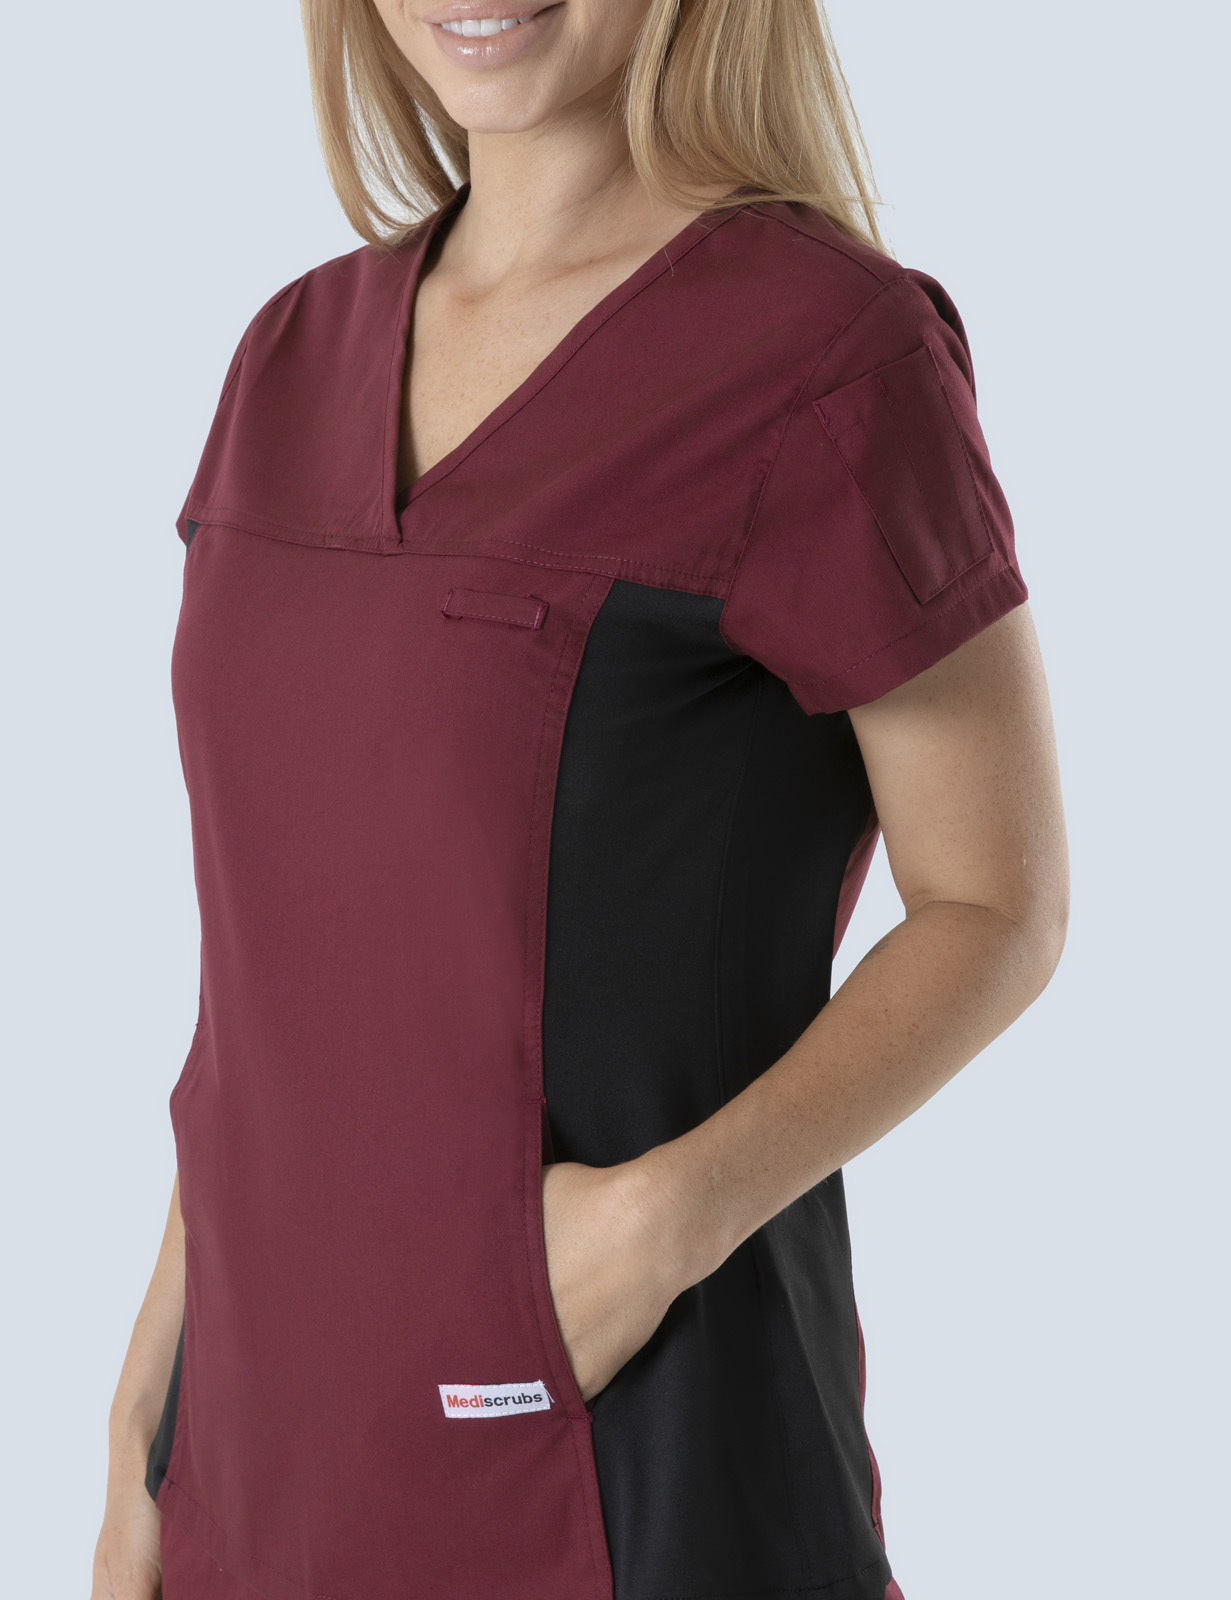 Women's Fit Solid Scrub Top With Spandex Panel - Burgundy - Large